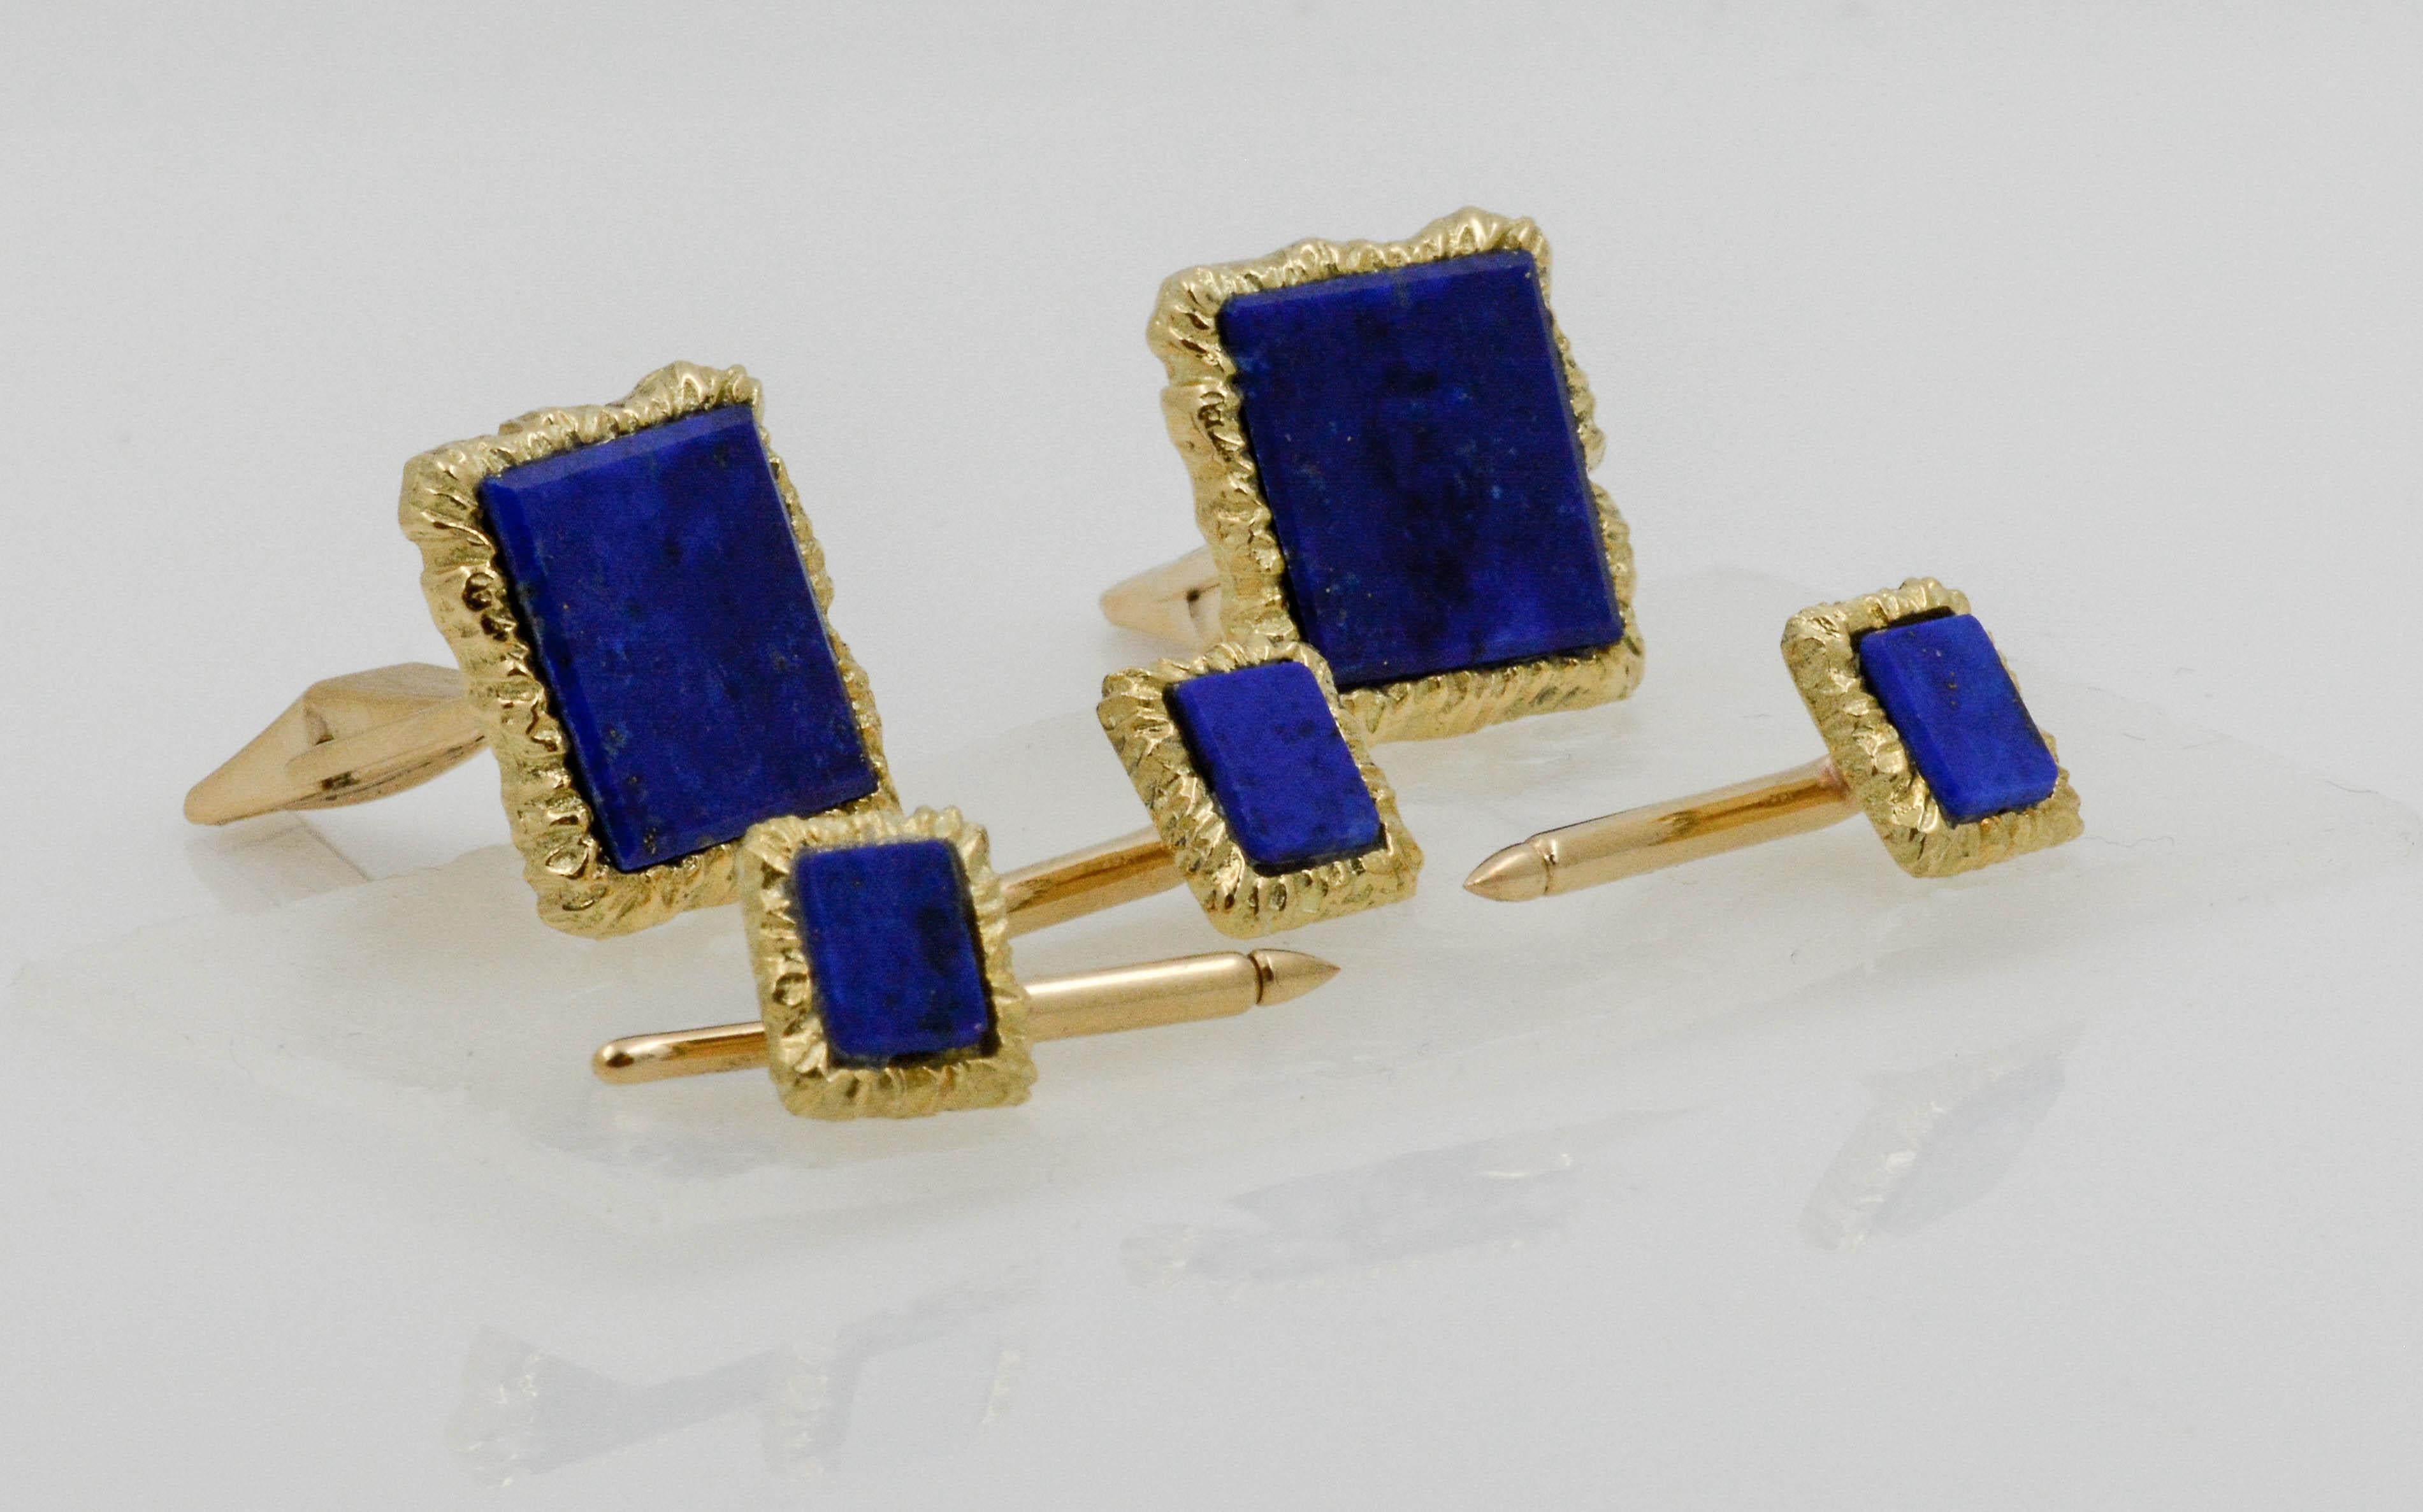 This polished look gives his business attire a classic finish. Made in 14K textured yellow gold, each of these refined men's rectangular cuff links and shirt studs feature a rich  Lapis Lazuli gemstones in a square frame. Buffed to a bright luster,